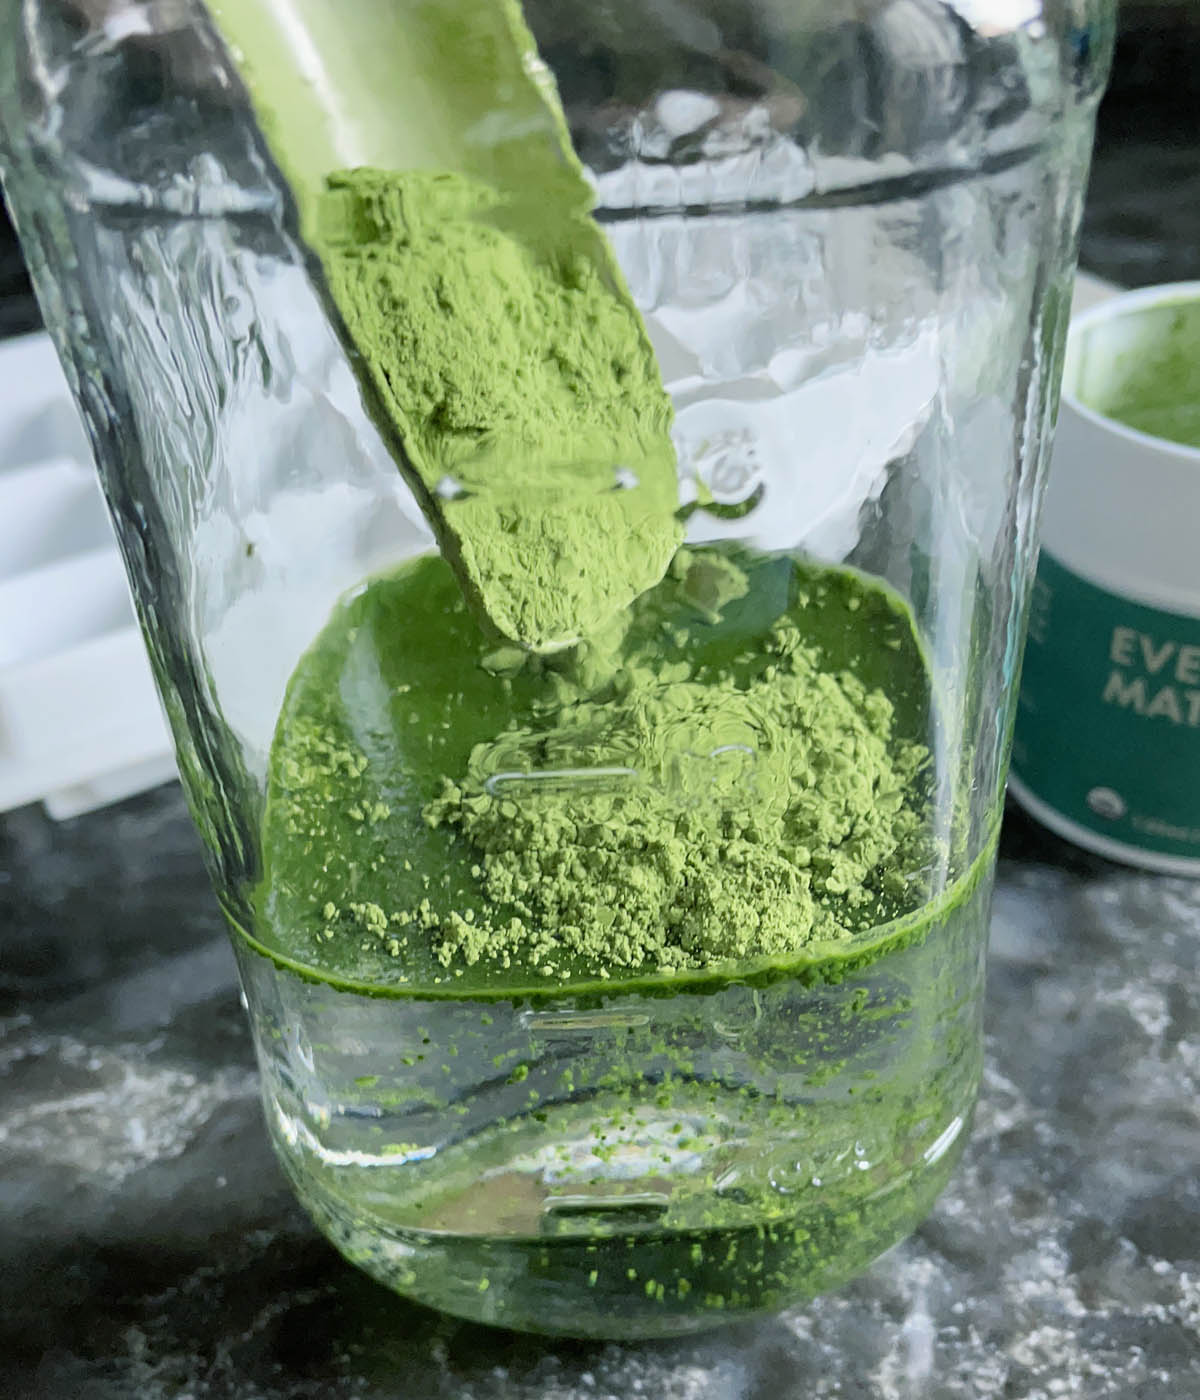 Green powder being added to a glass jar containing water.